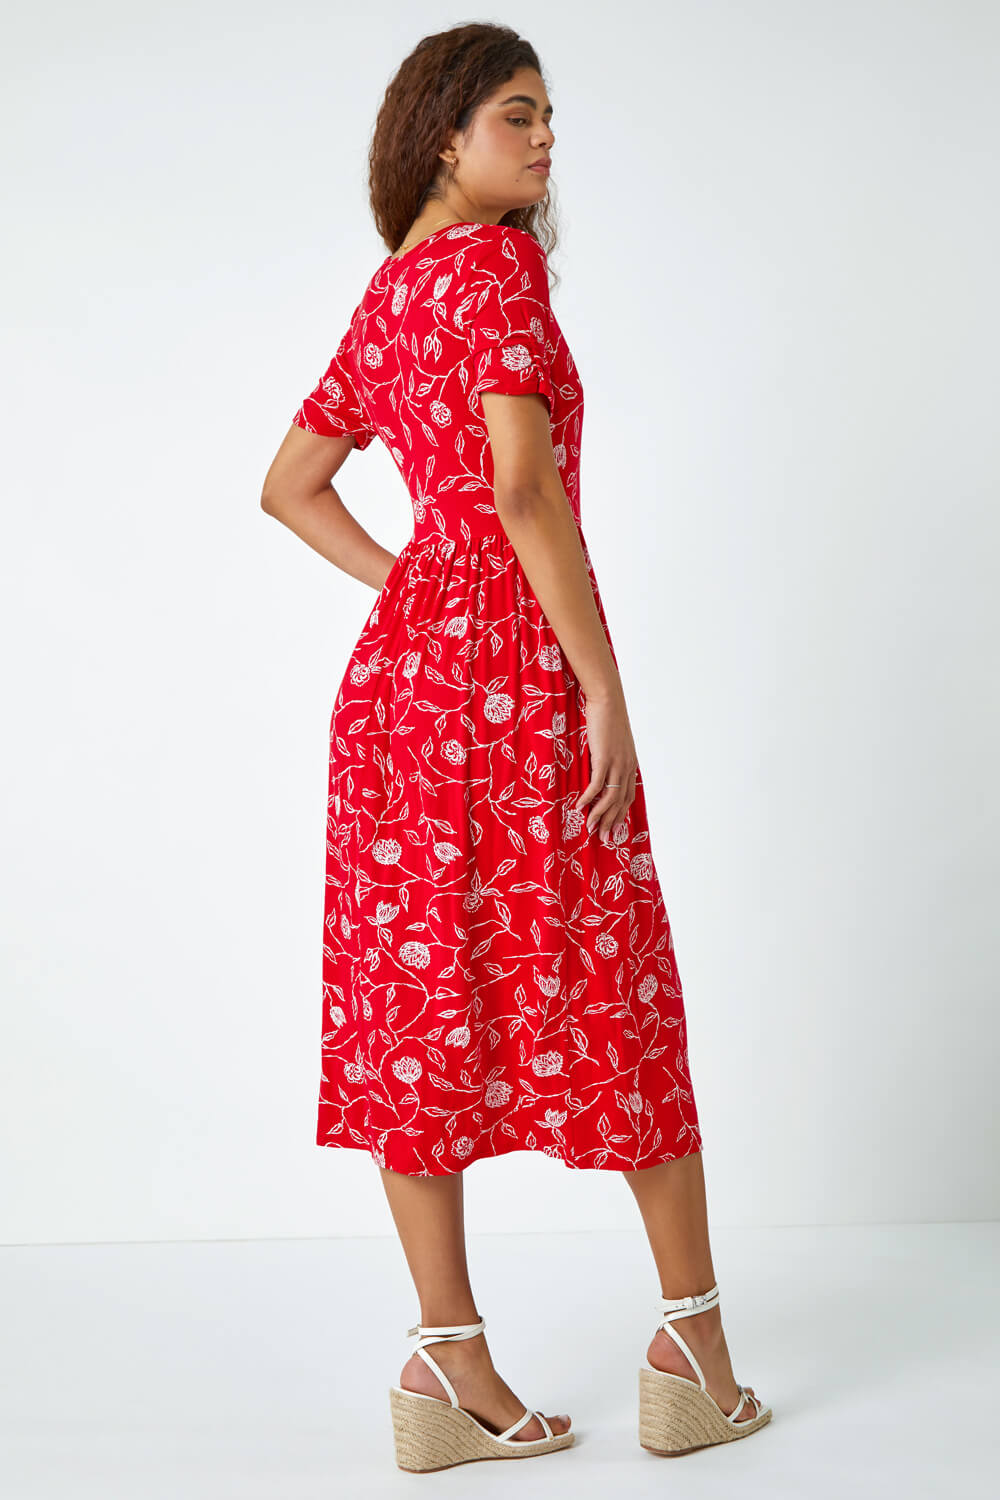 Red Floral Print Midi Wrap Stretch Dress, Image 3 of 5